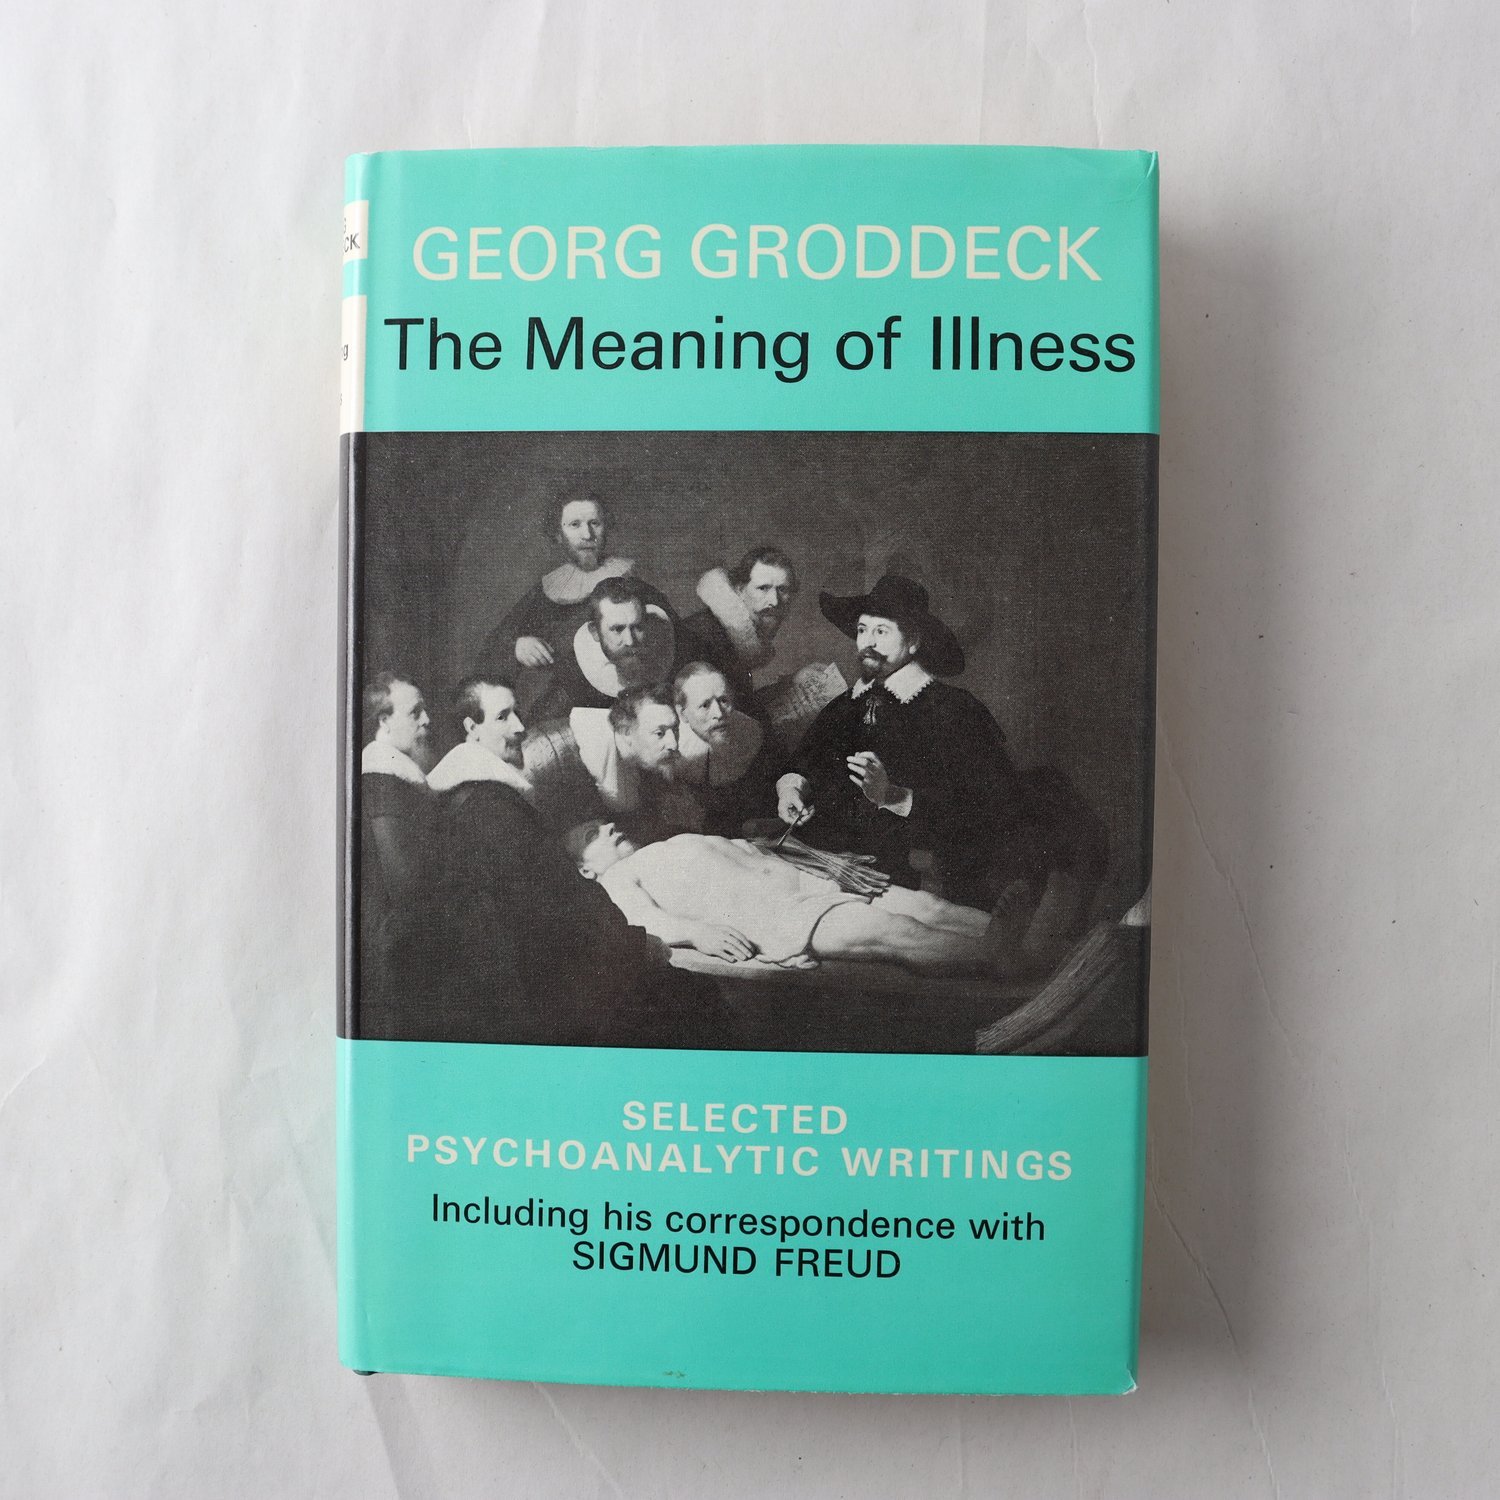 Georg Groddeck, The Meaning of Illness